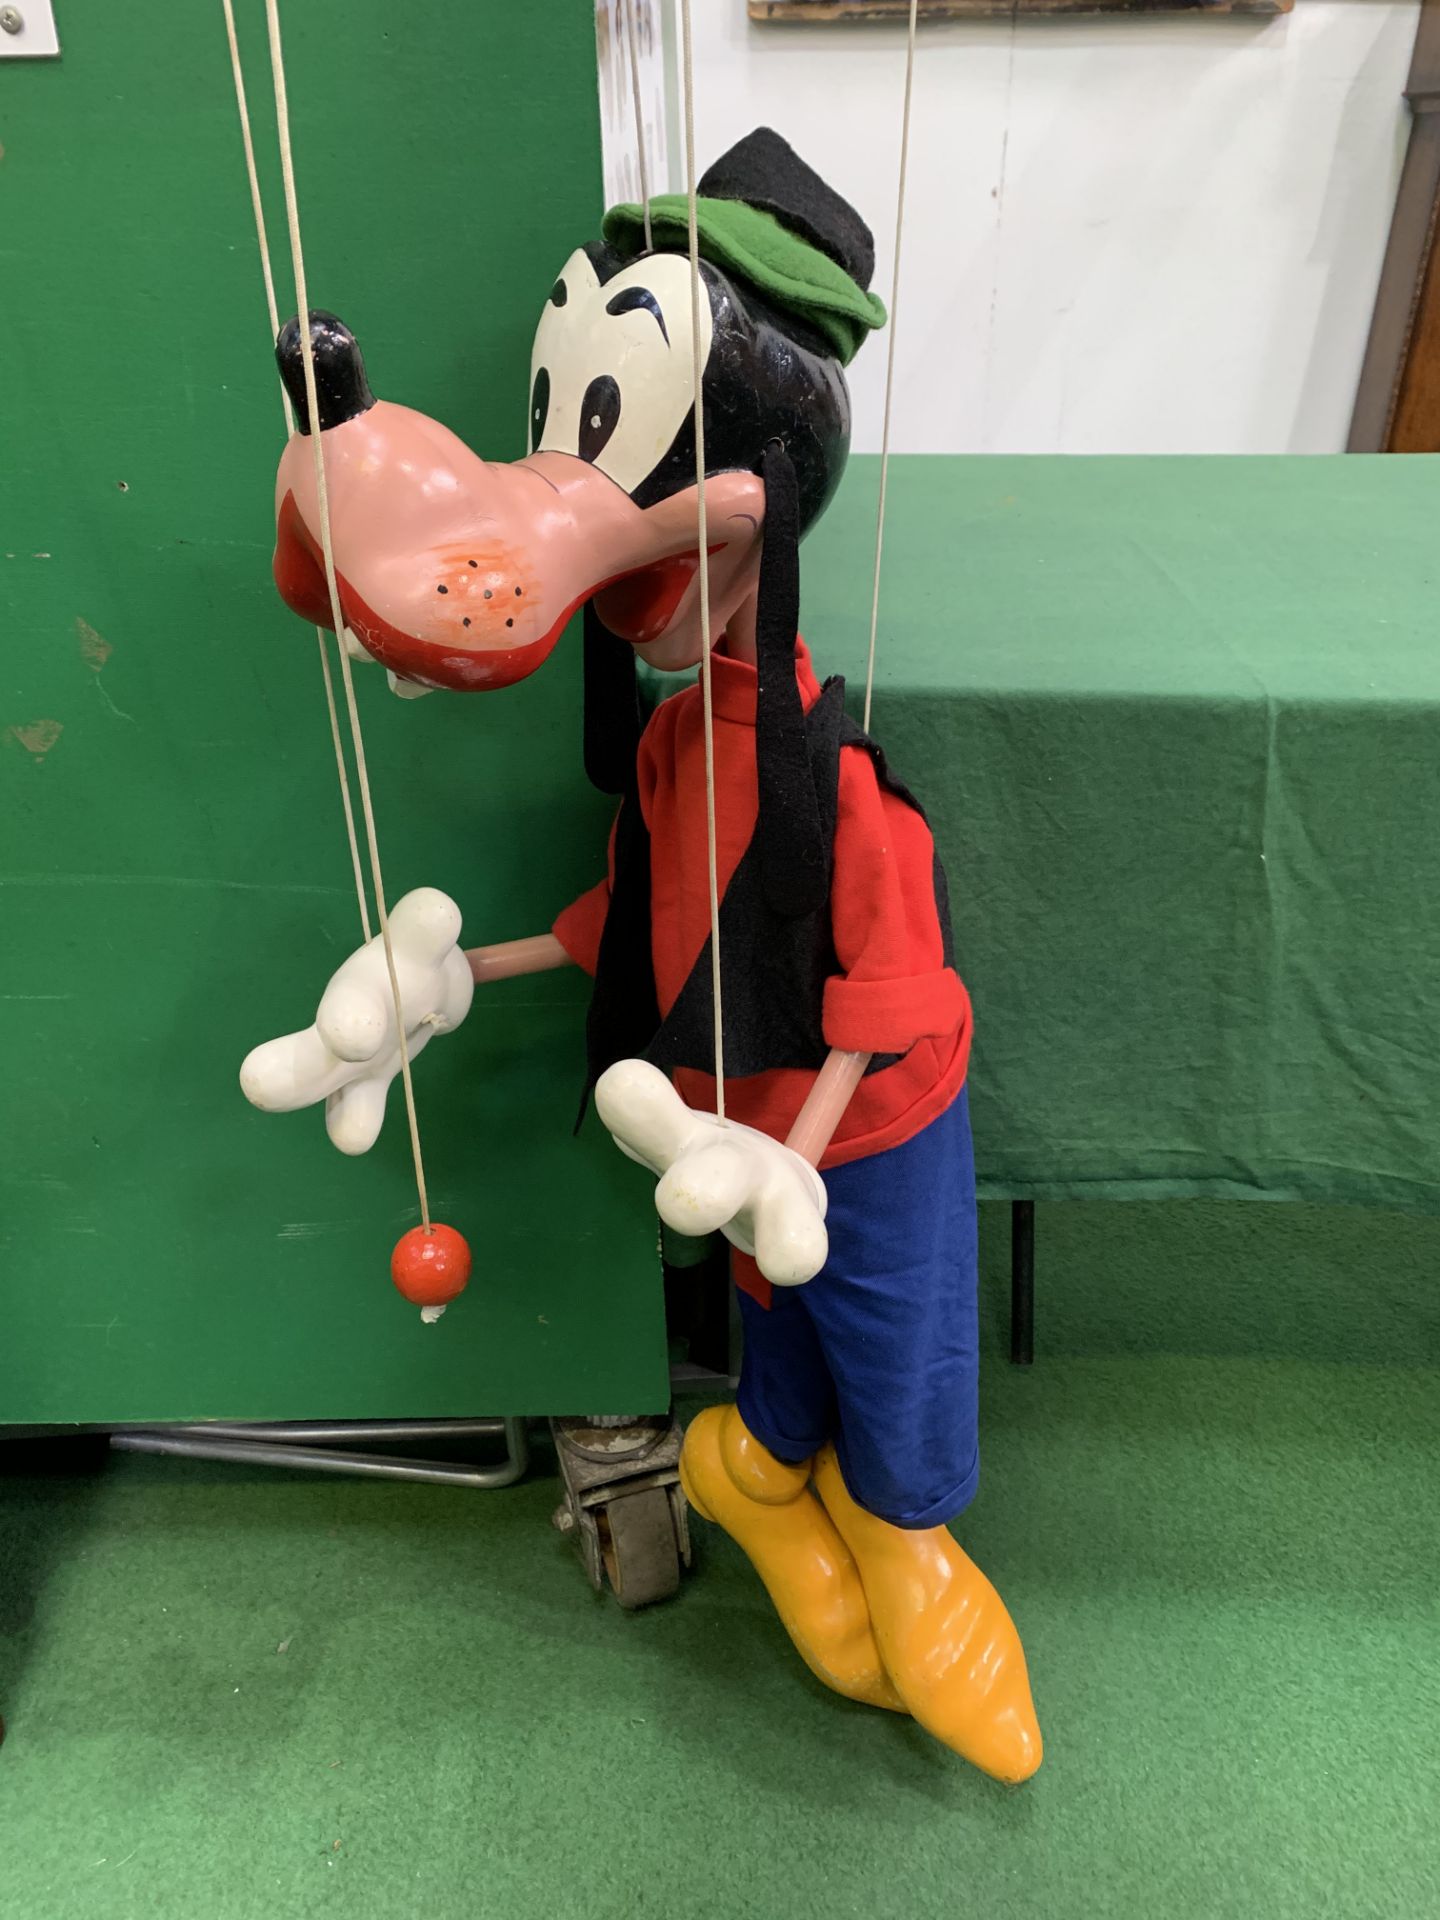 1950's Pelham Puppets large 'Goofy' ex shop display. Height of puppet approx 100cms. Estimate £100- - Image 2 of 4